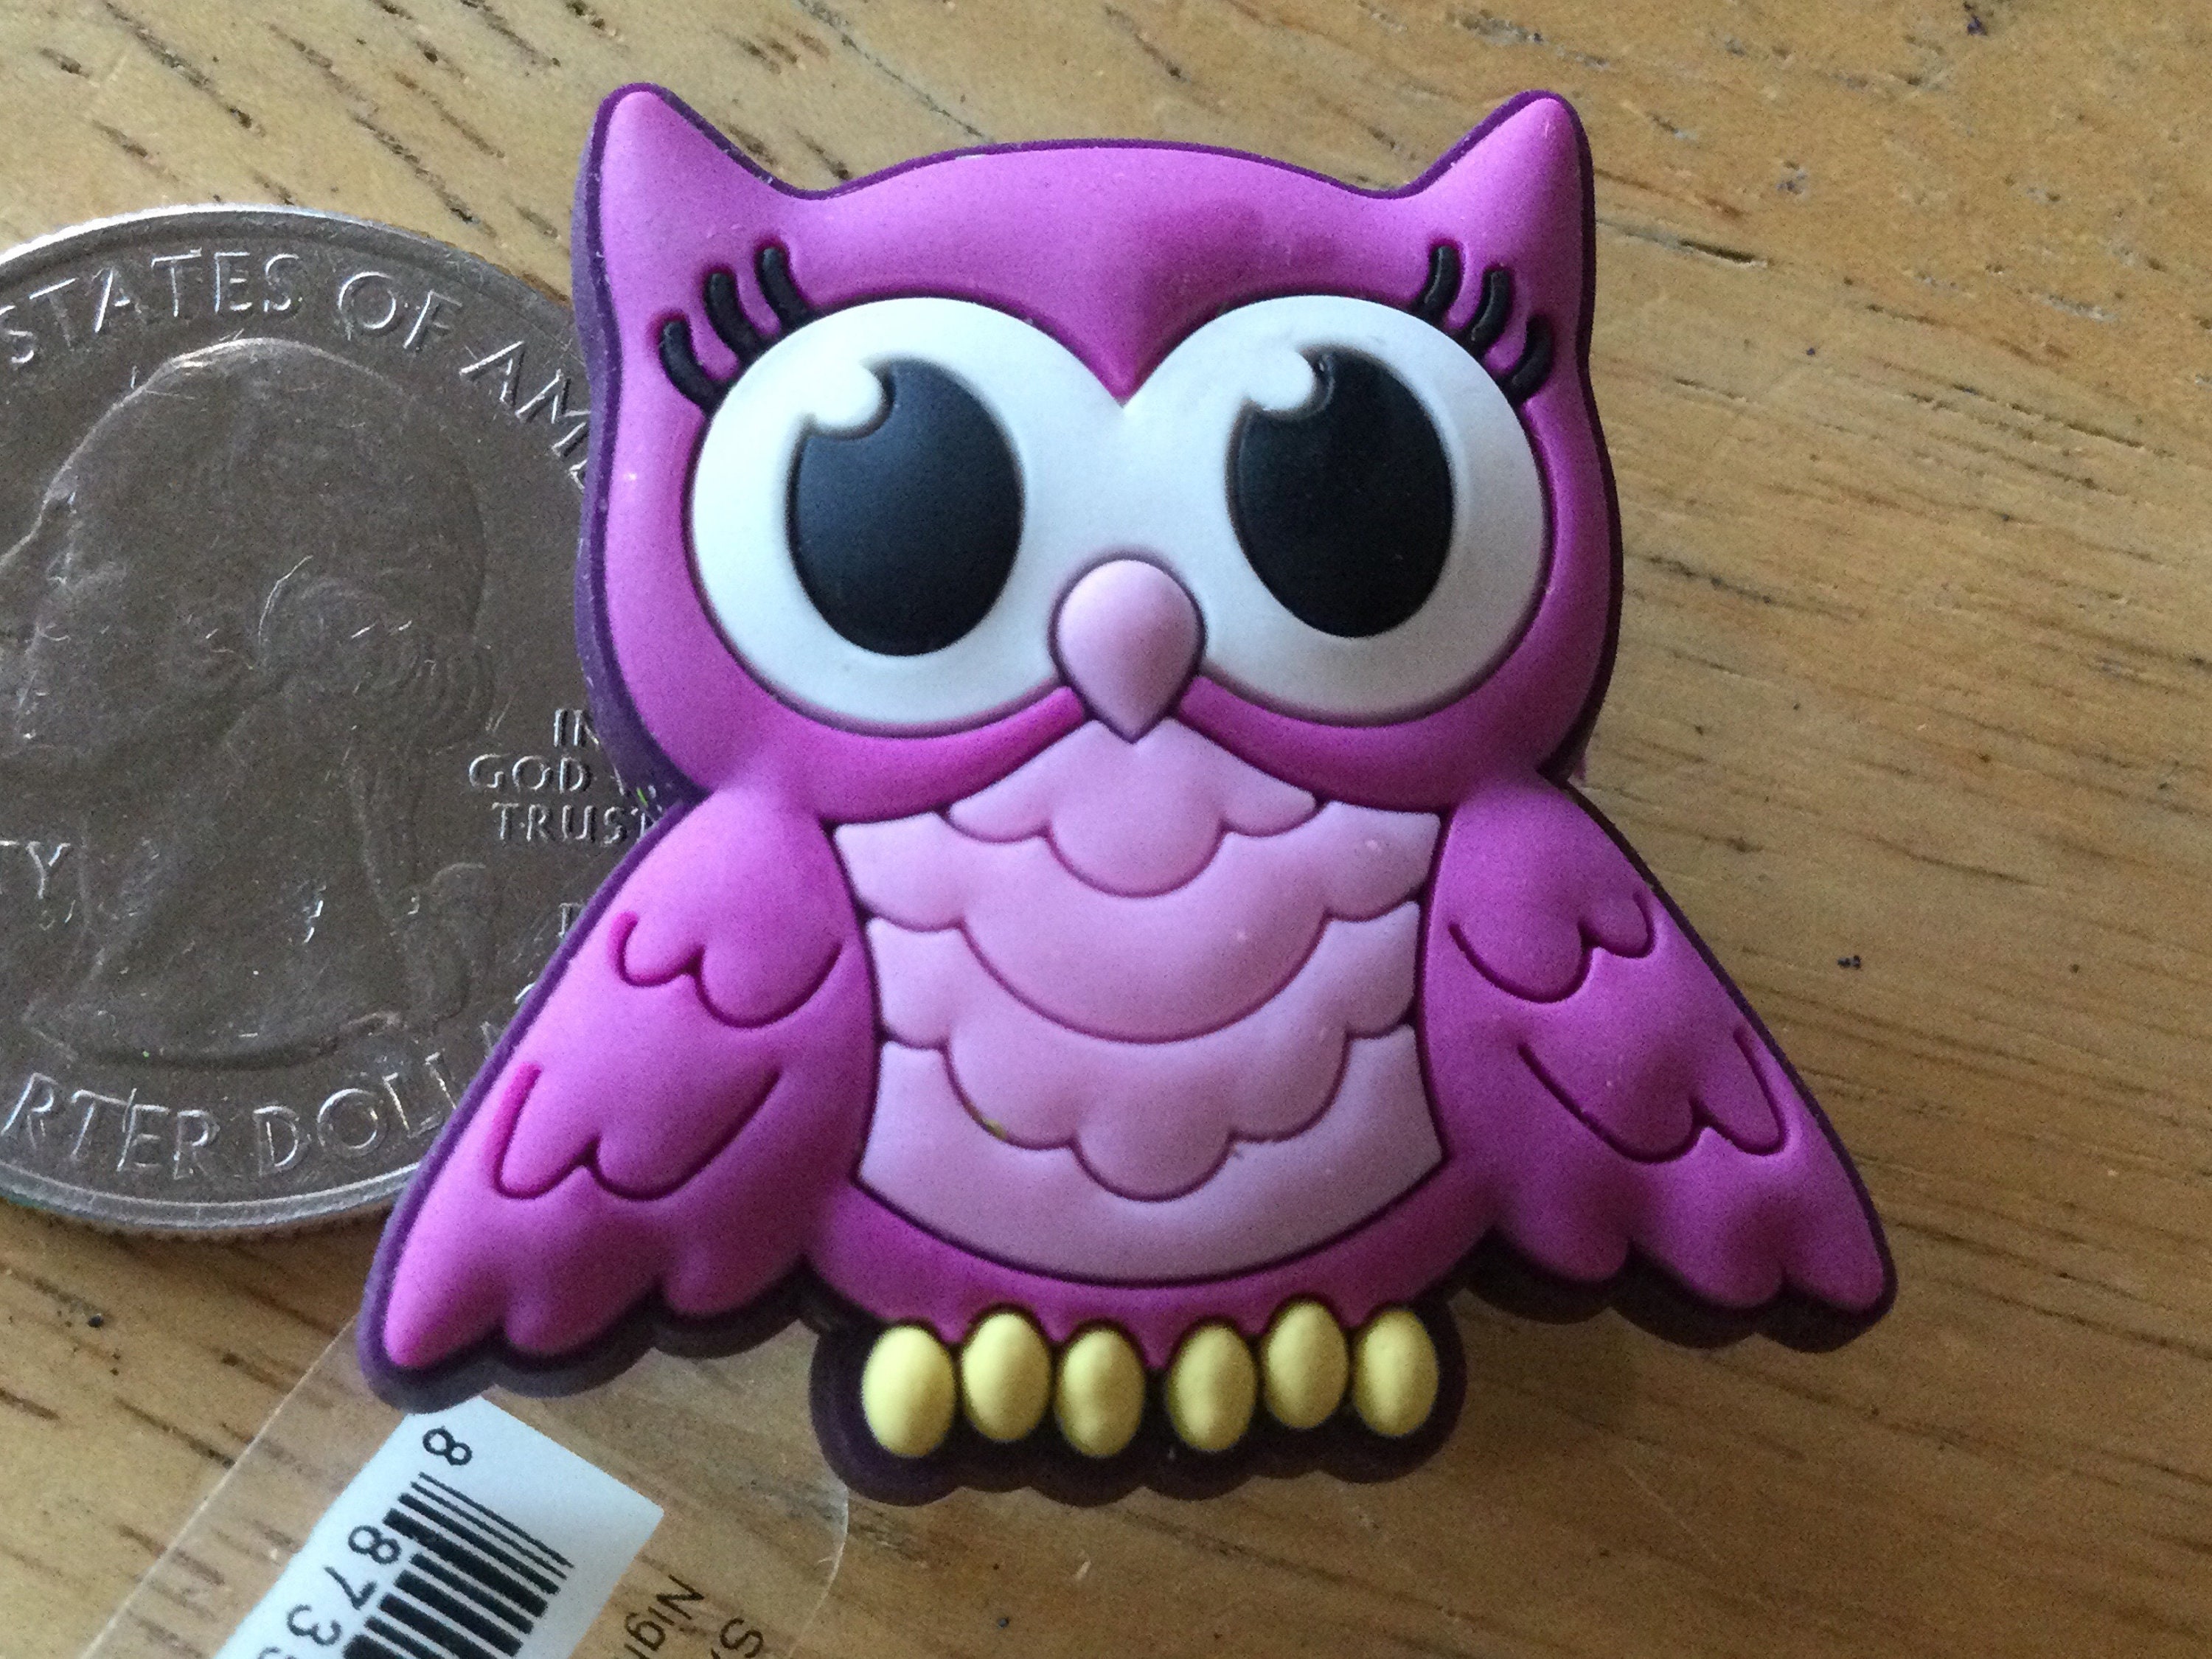 Crocs Croc Charms - Harry Potter Owl - $3 - From Cait